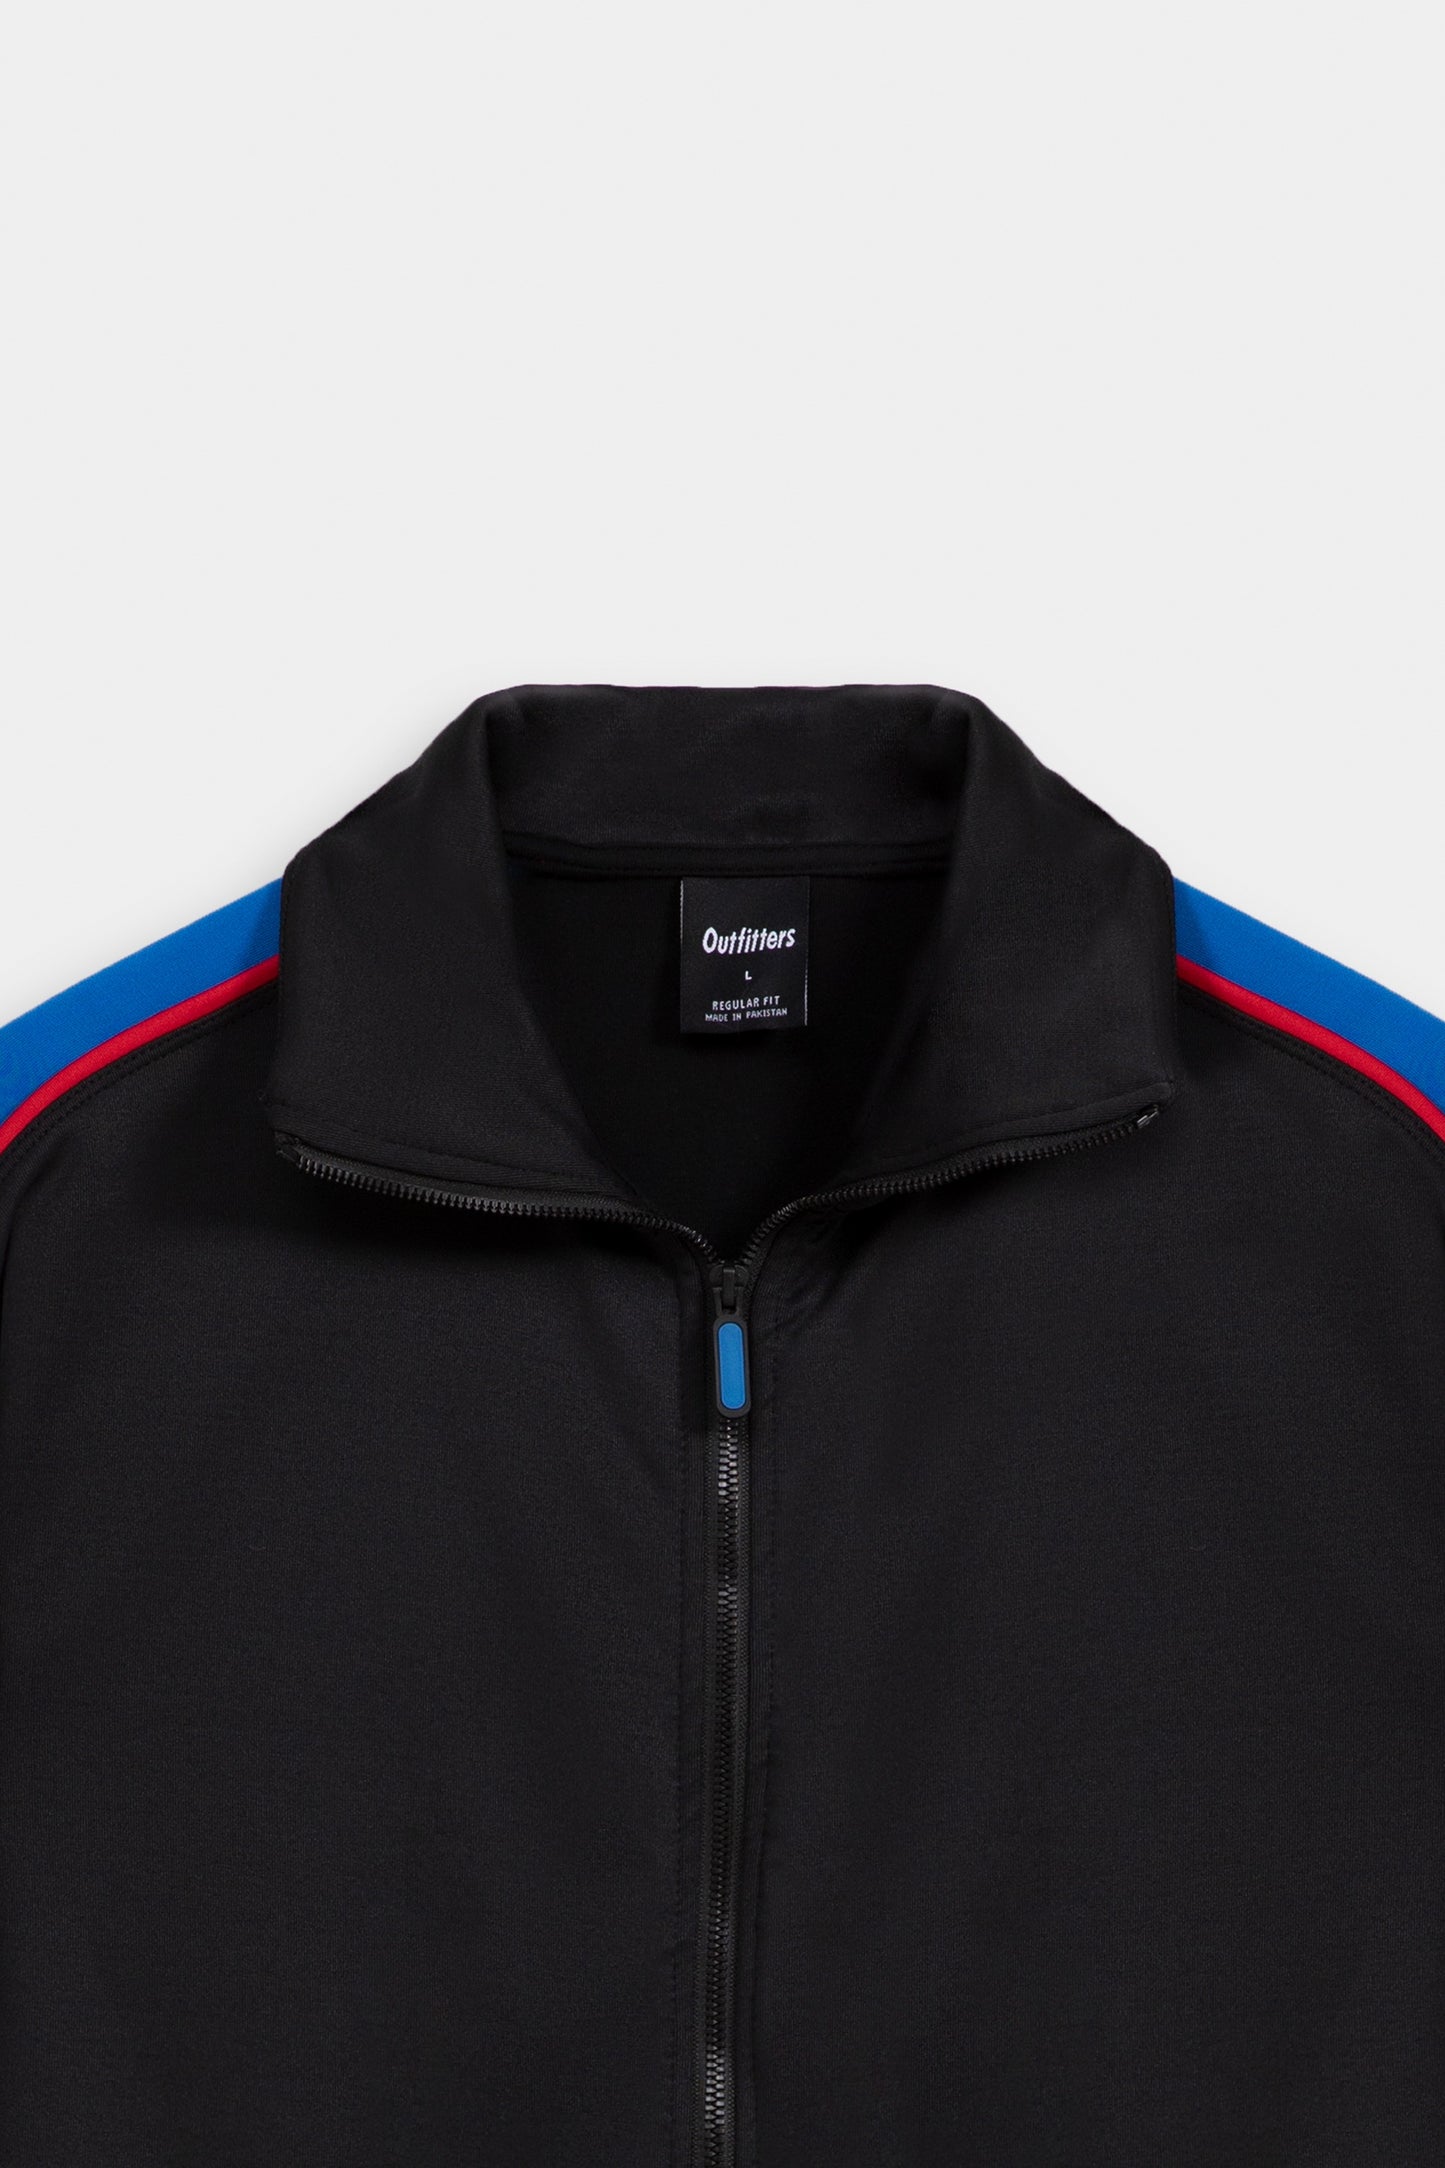 Track jacket with side stripes